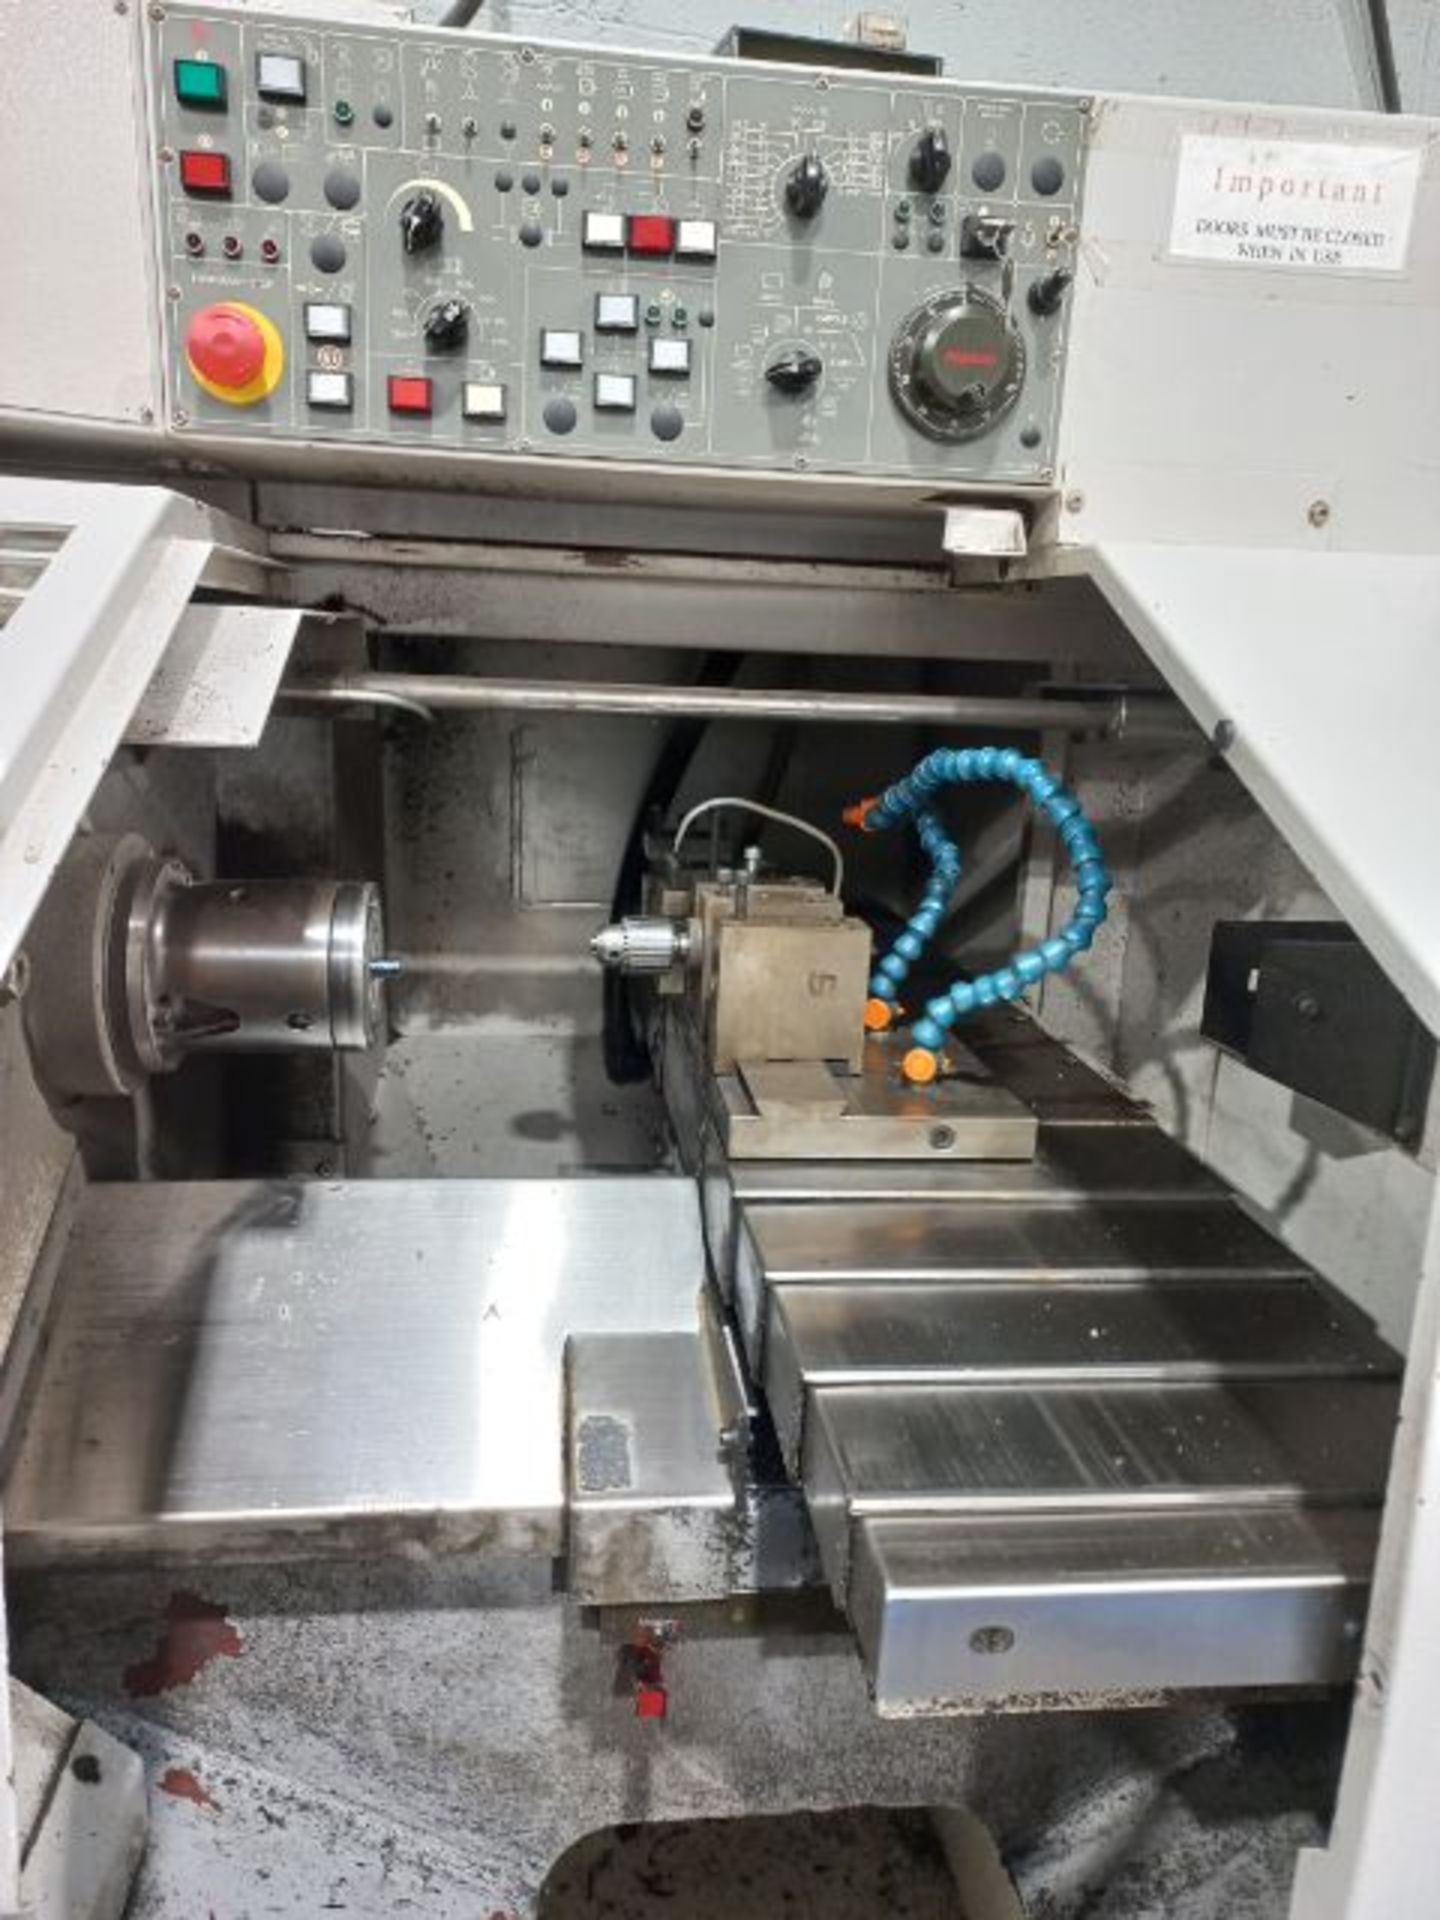 Goodway TA-32 CNC Lathe (2002) Serial Number 81692 with Goodway BF-654 Bar Feed (Location: Earls - Image 9 of 10